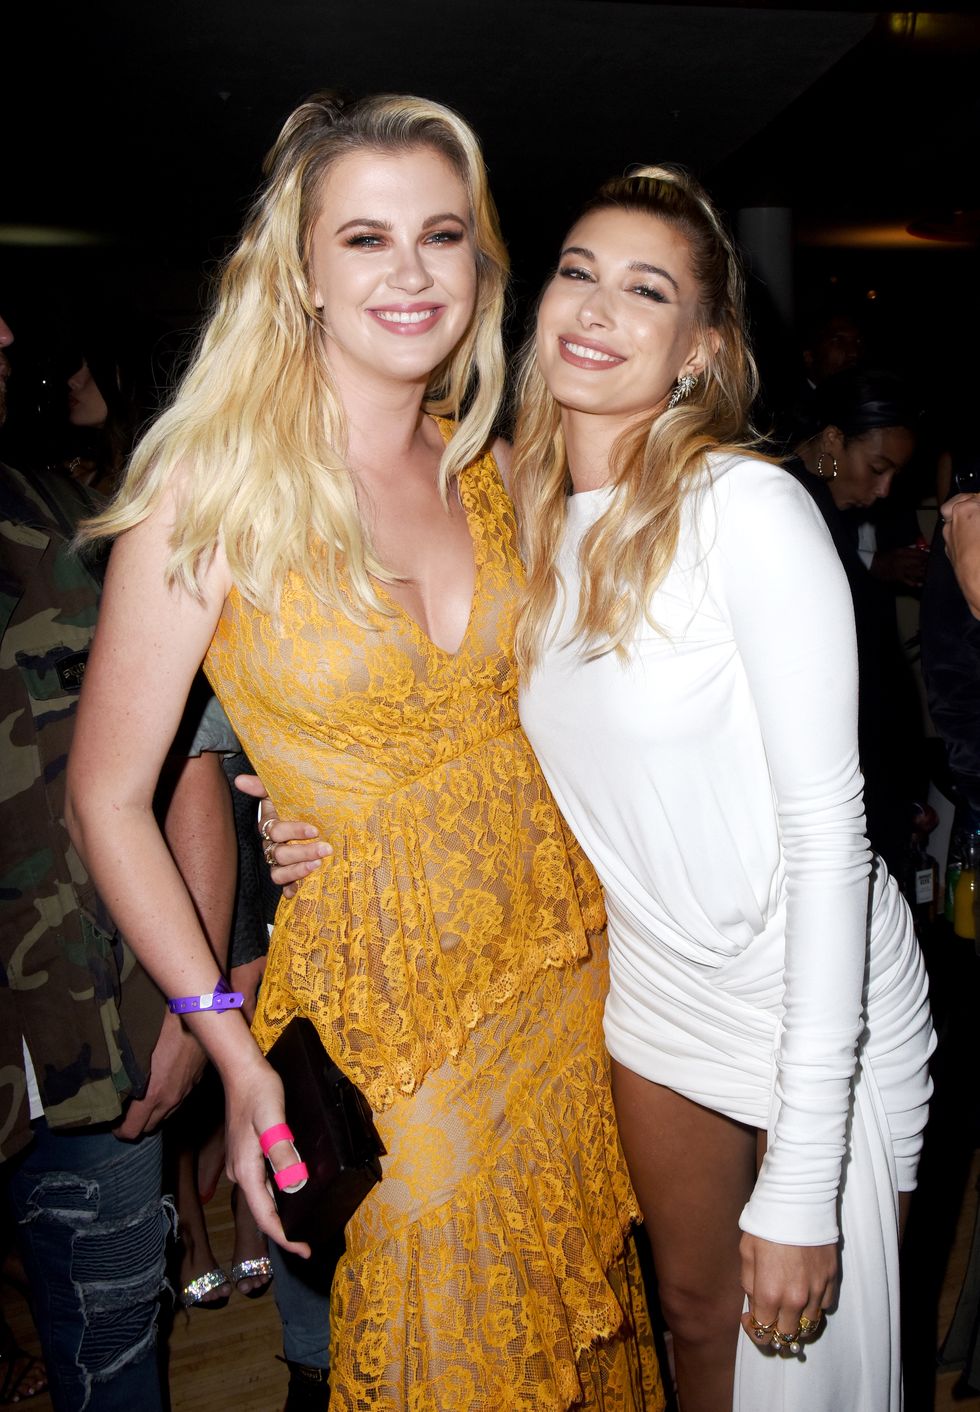 los angeles, ca june 24 ireland baldwin l and hailey baldwin attend the 2017 maxim hot 100 party at hollywood palladium on june 24, 2017 in los angeles, california photo by vivien killileagetty images for karma international